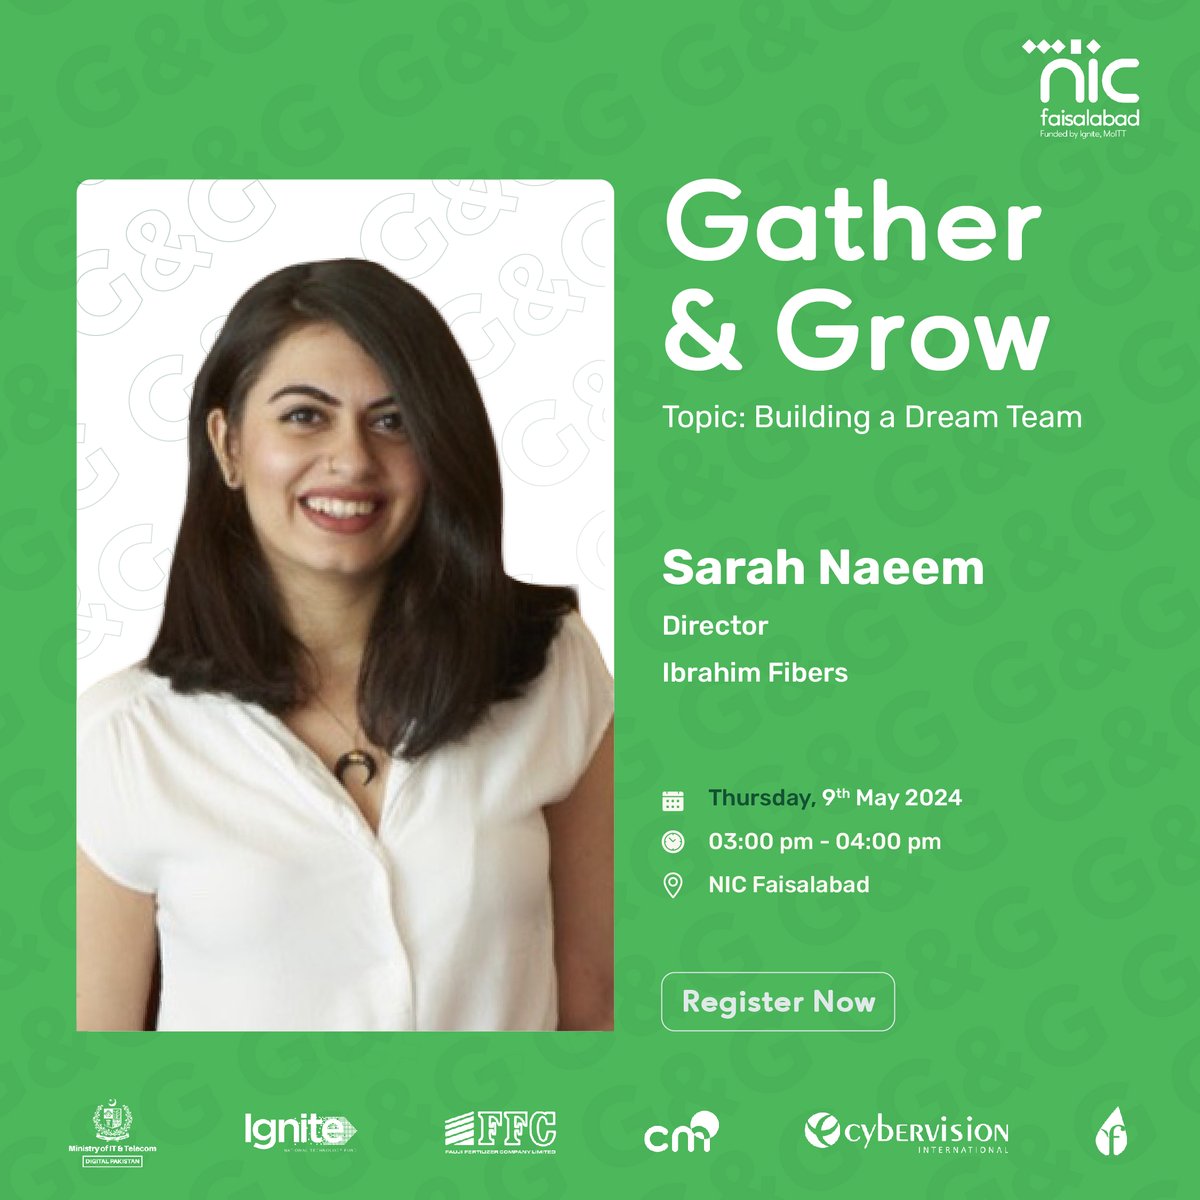 We’re excited to share that Sarah Naeem, Director at Ibrahim Fibers and one of Faisalabad's top #women #business leaders, will be joining us for our next Gather and Grow session moderated by Zeeshan Shahid, Project Director at #NICF.

#WomenInBiz #LeadershipTips #TeamBuilding